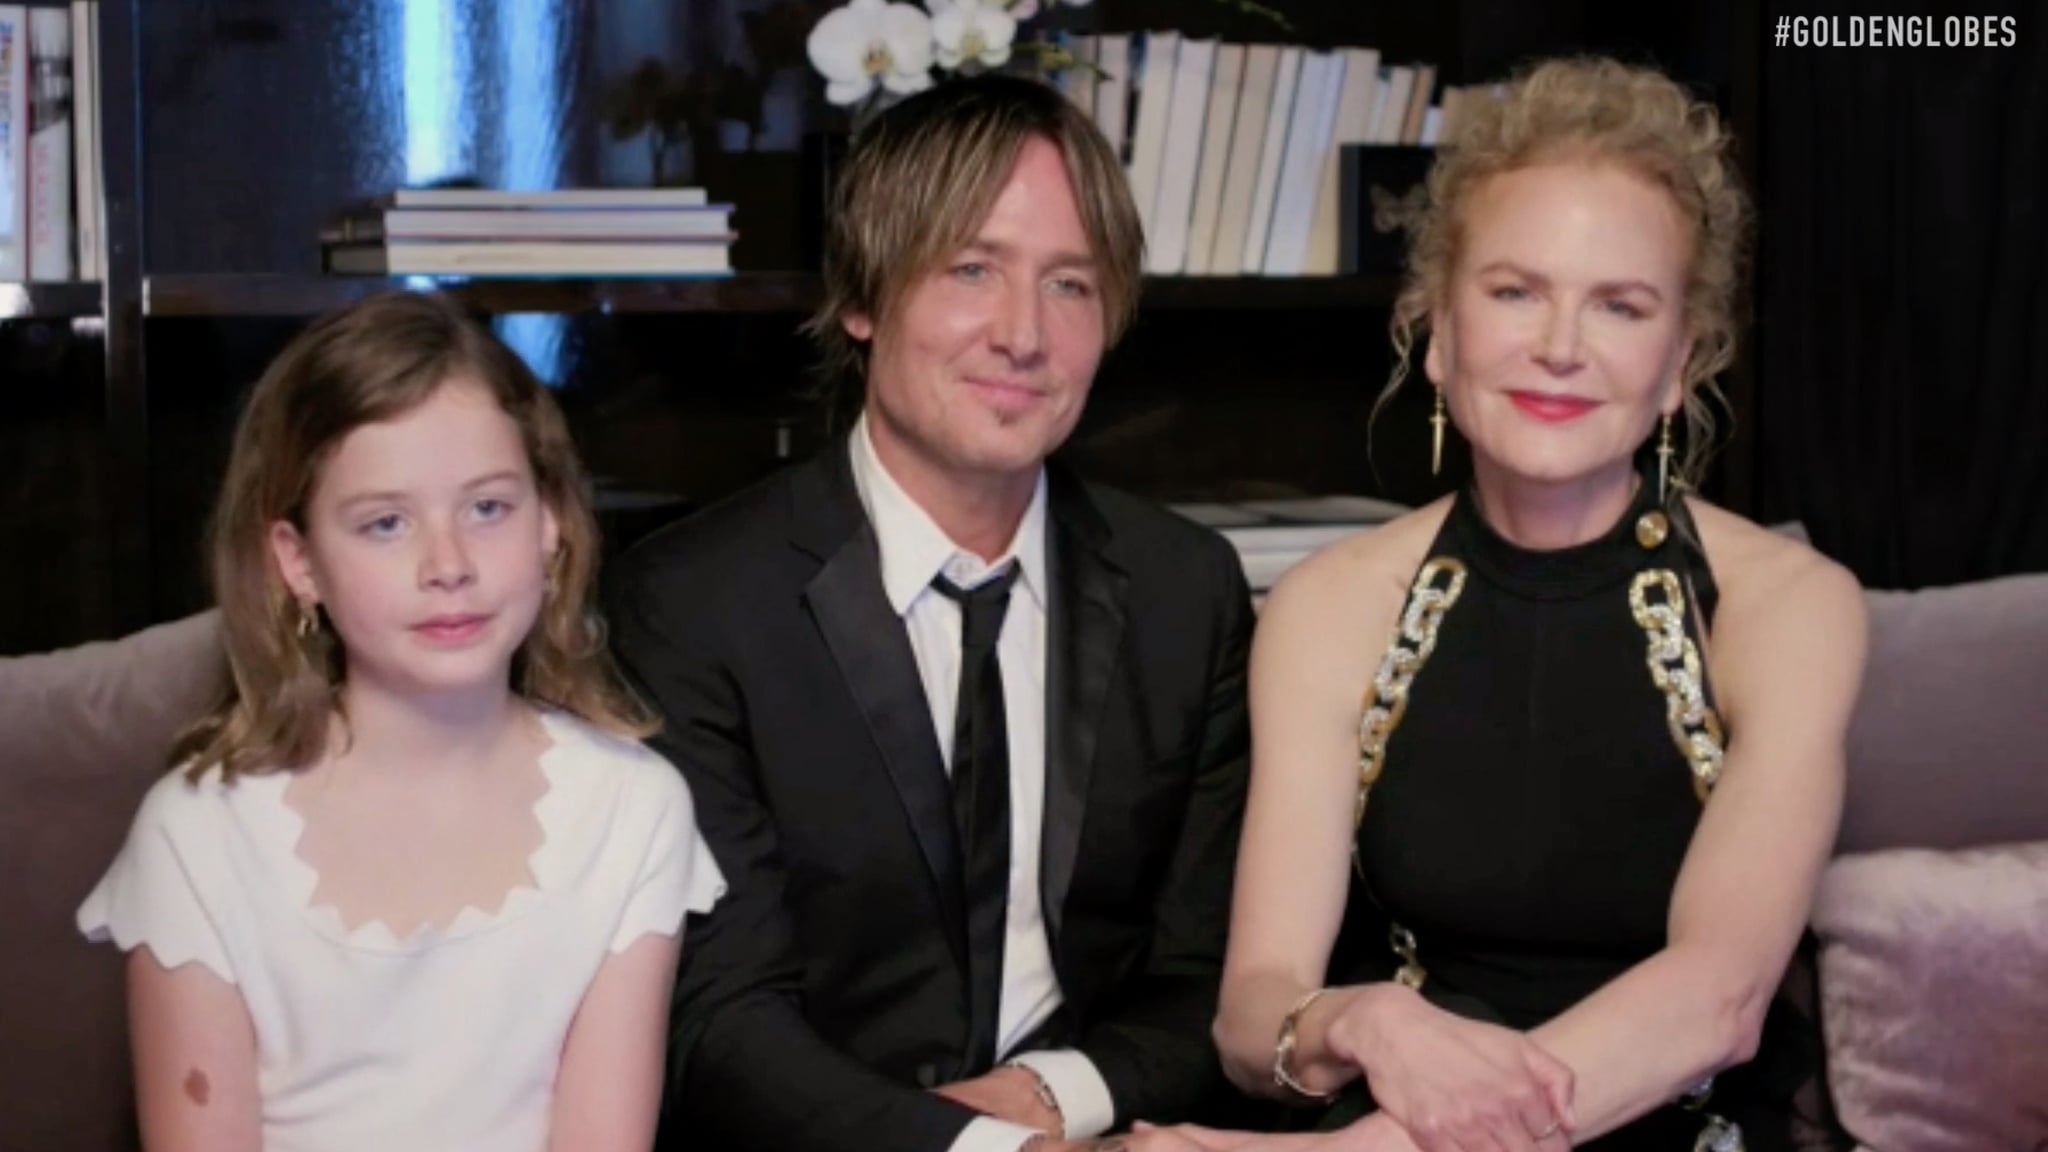 UNSPECIFIED: 78th Annual GOLDEN GLOBE AWARDS -- Pictured in this screengrab released on February 28, (l-r) Faith Margaret Kidman-Urban, Keith Urban, and Nicole Kidman speak during at the 78th Annual Golden Globe Awards broadcast on February 28, 2021. --  (Photo by NBC/NBCU Photo Bank via Getty Images)